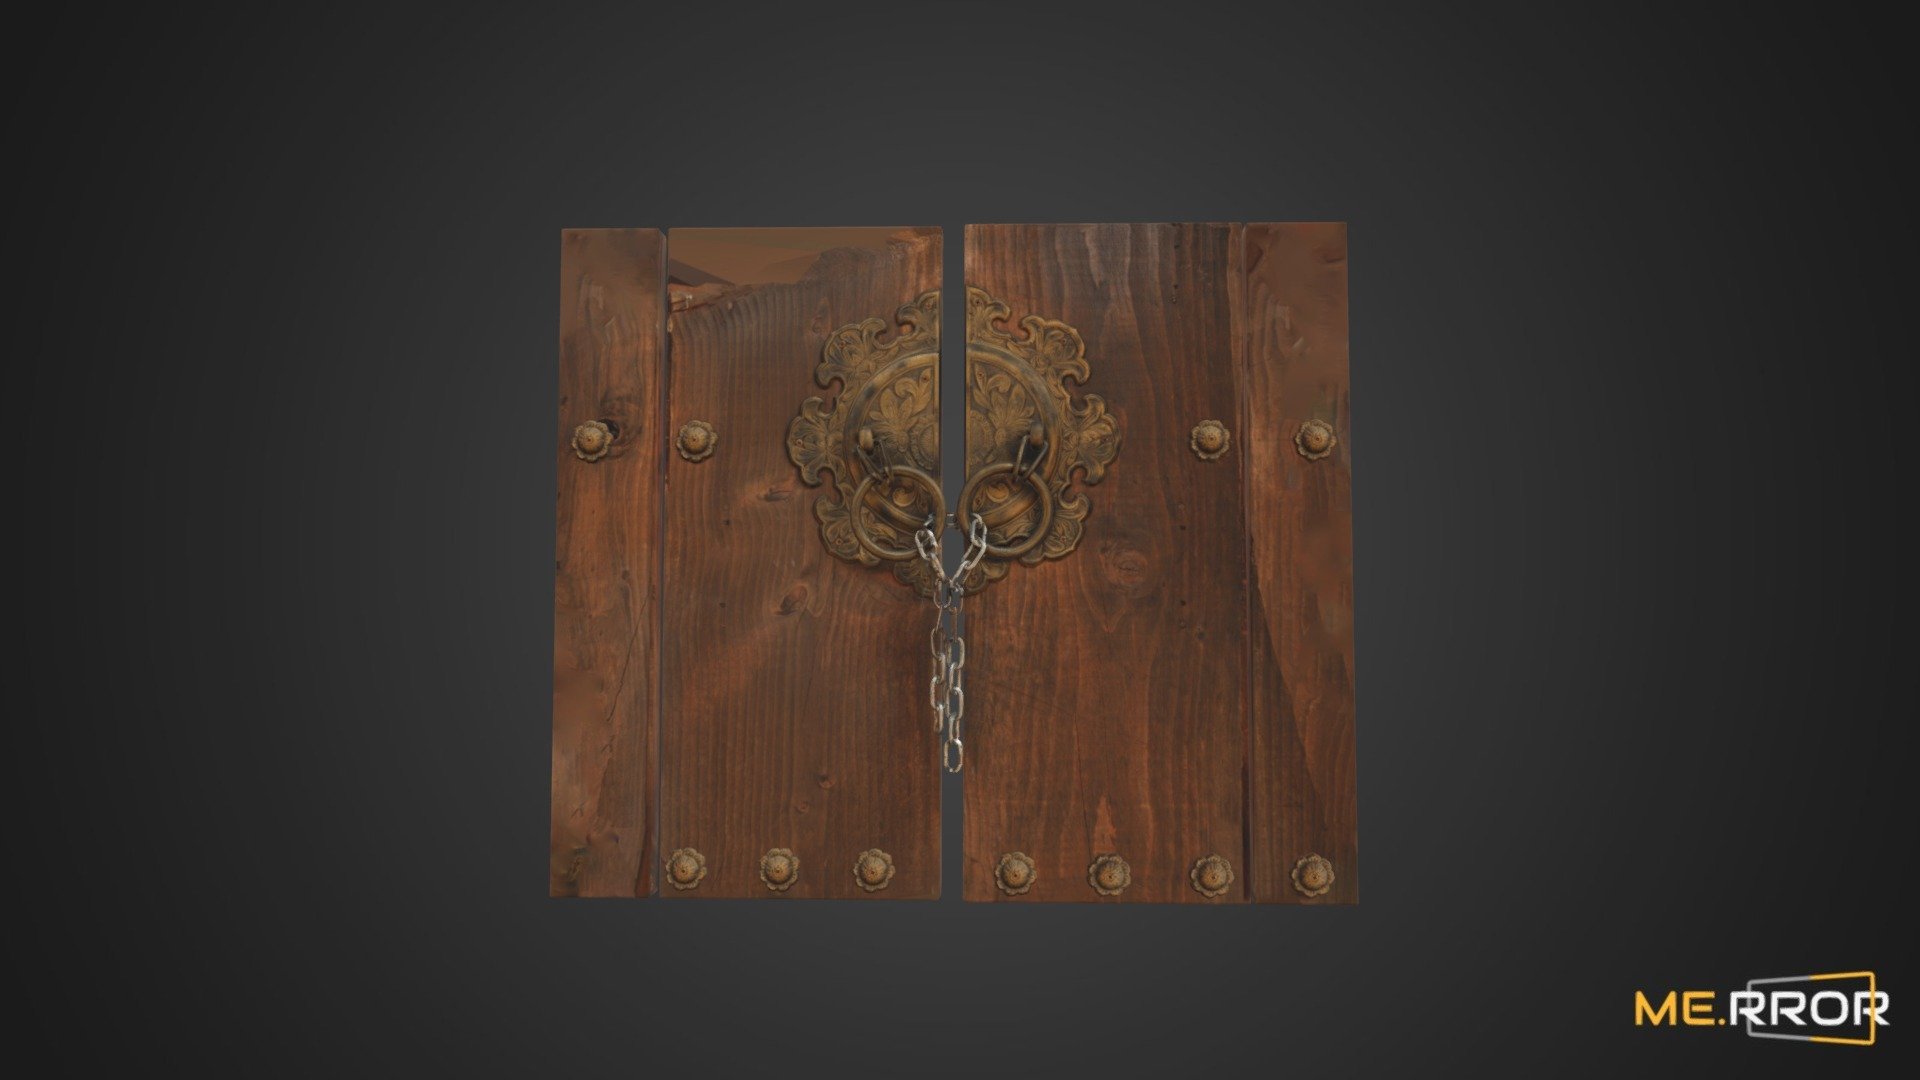 MERROR is a 3D Content PLATFORM which introduces various Asian assets to the 3D world


3DScanning #Photogrametry #ME.RROR - [Game-Ready] Asian Traditional Door - Buy Royalty Free 3D model by ME.RROR (@merror) 3d model